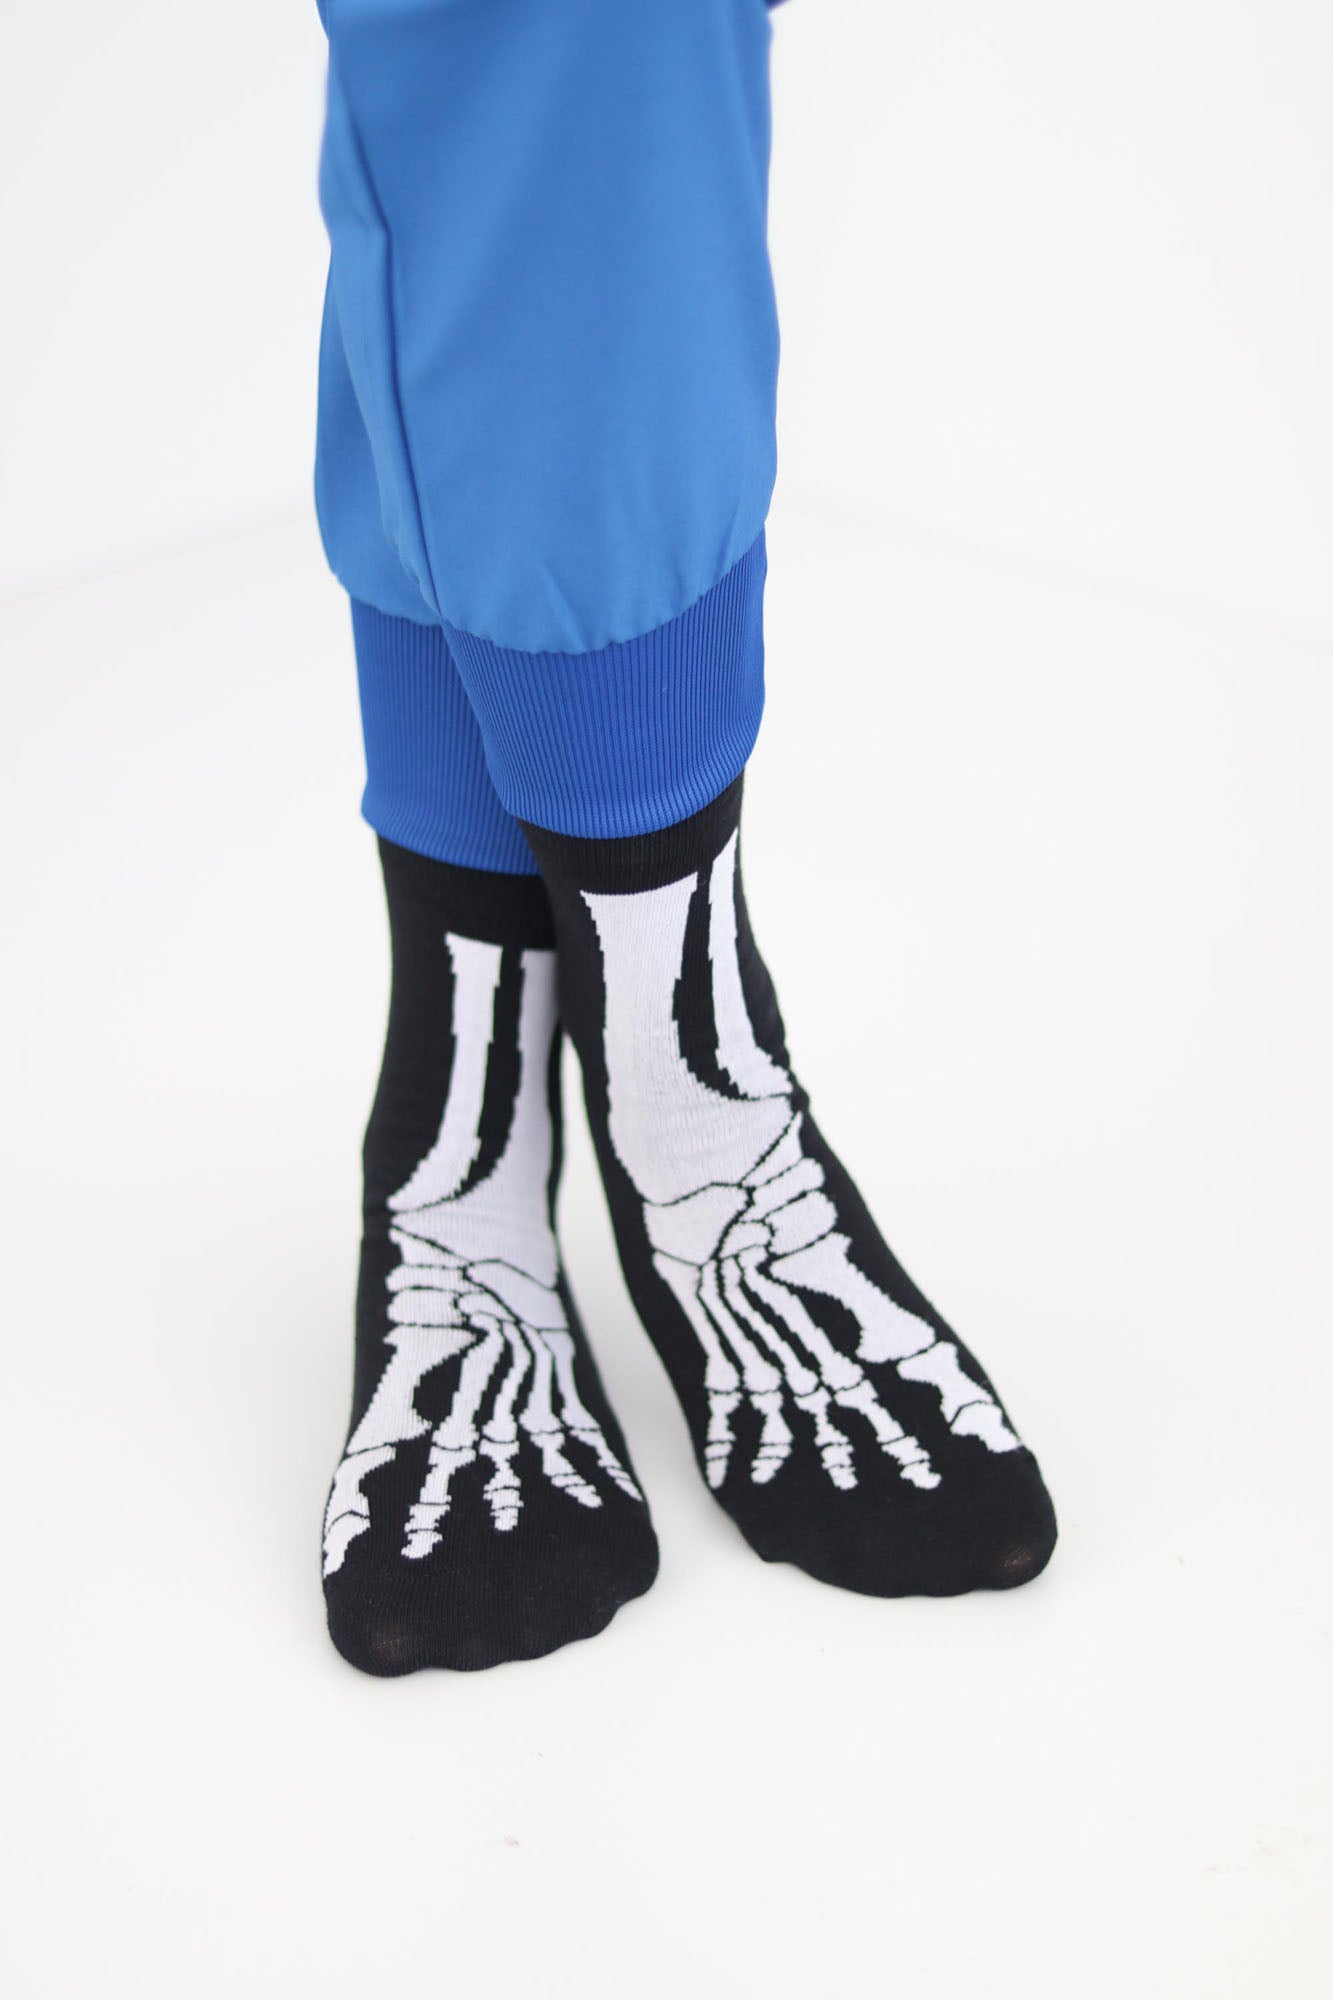 Skelton printed socks perfect for radiologists and Xray technicians